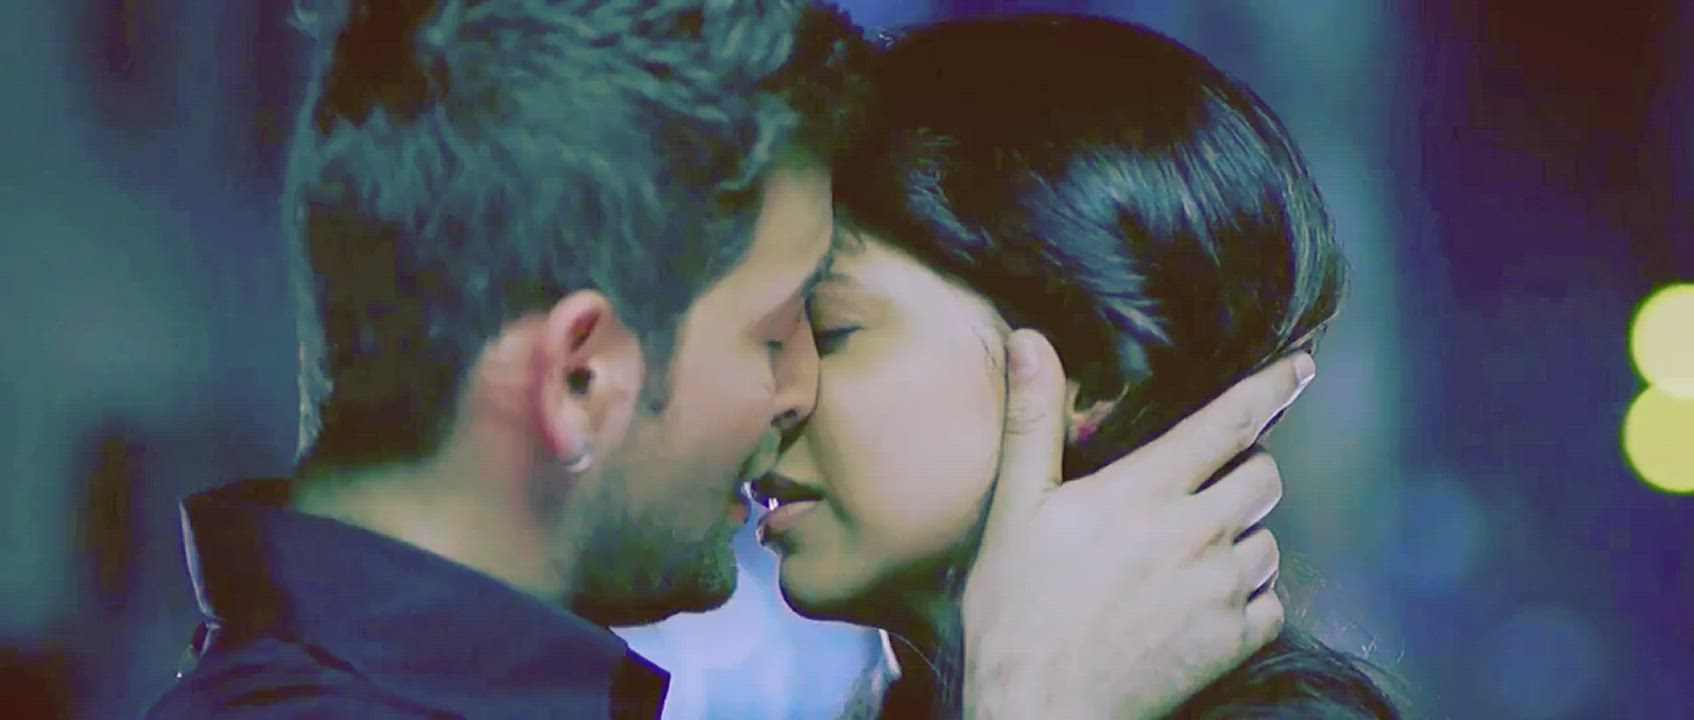 Asian Babe Bollywood Celebrity Indian Kiss Kissing gif